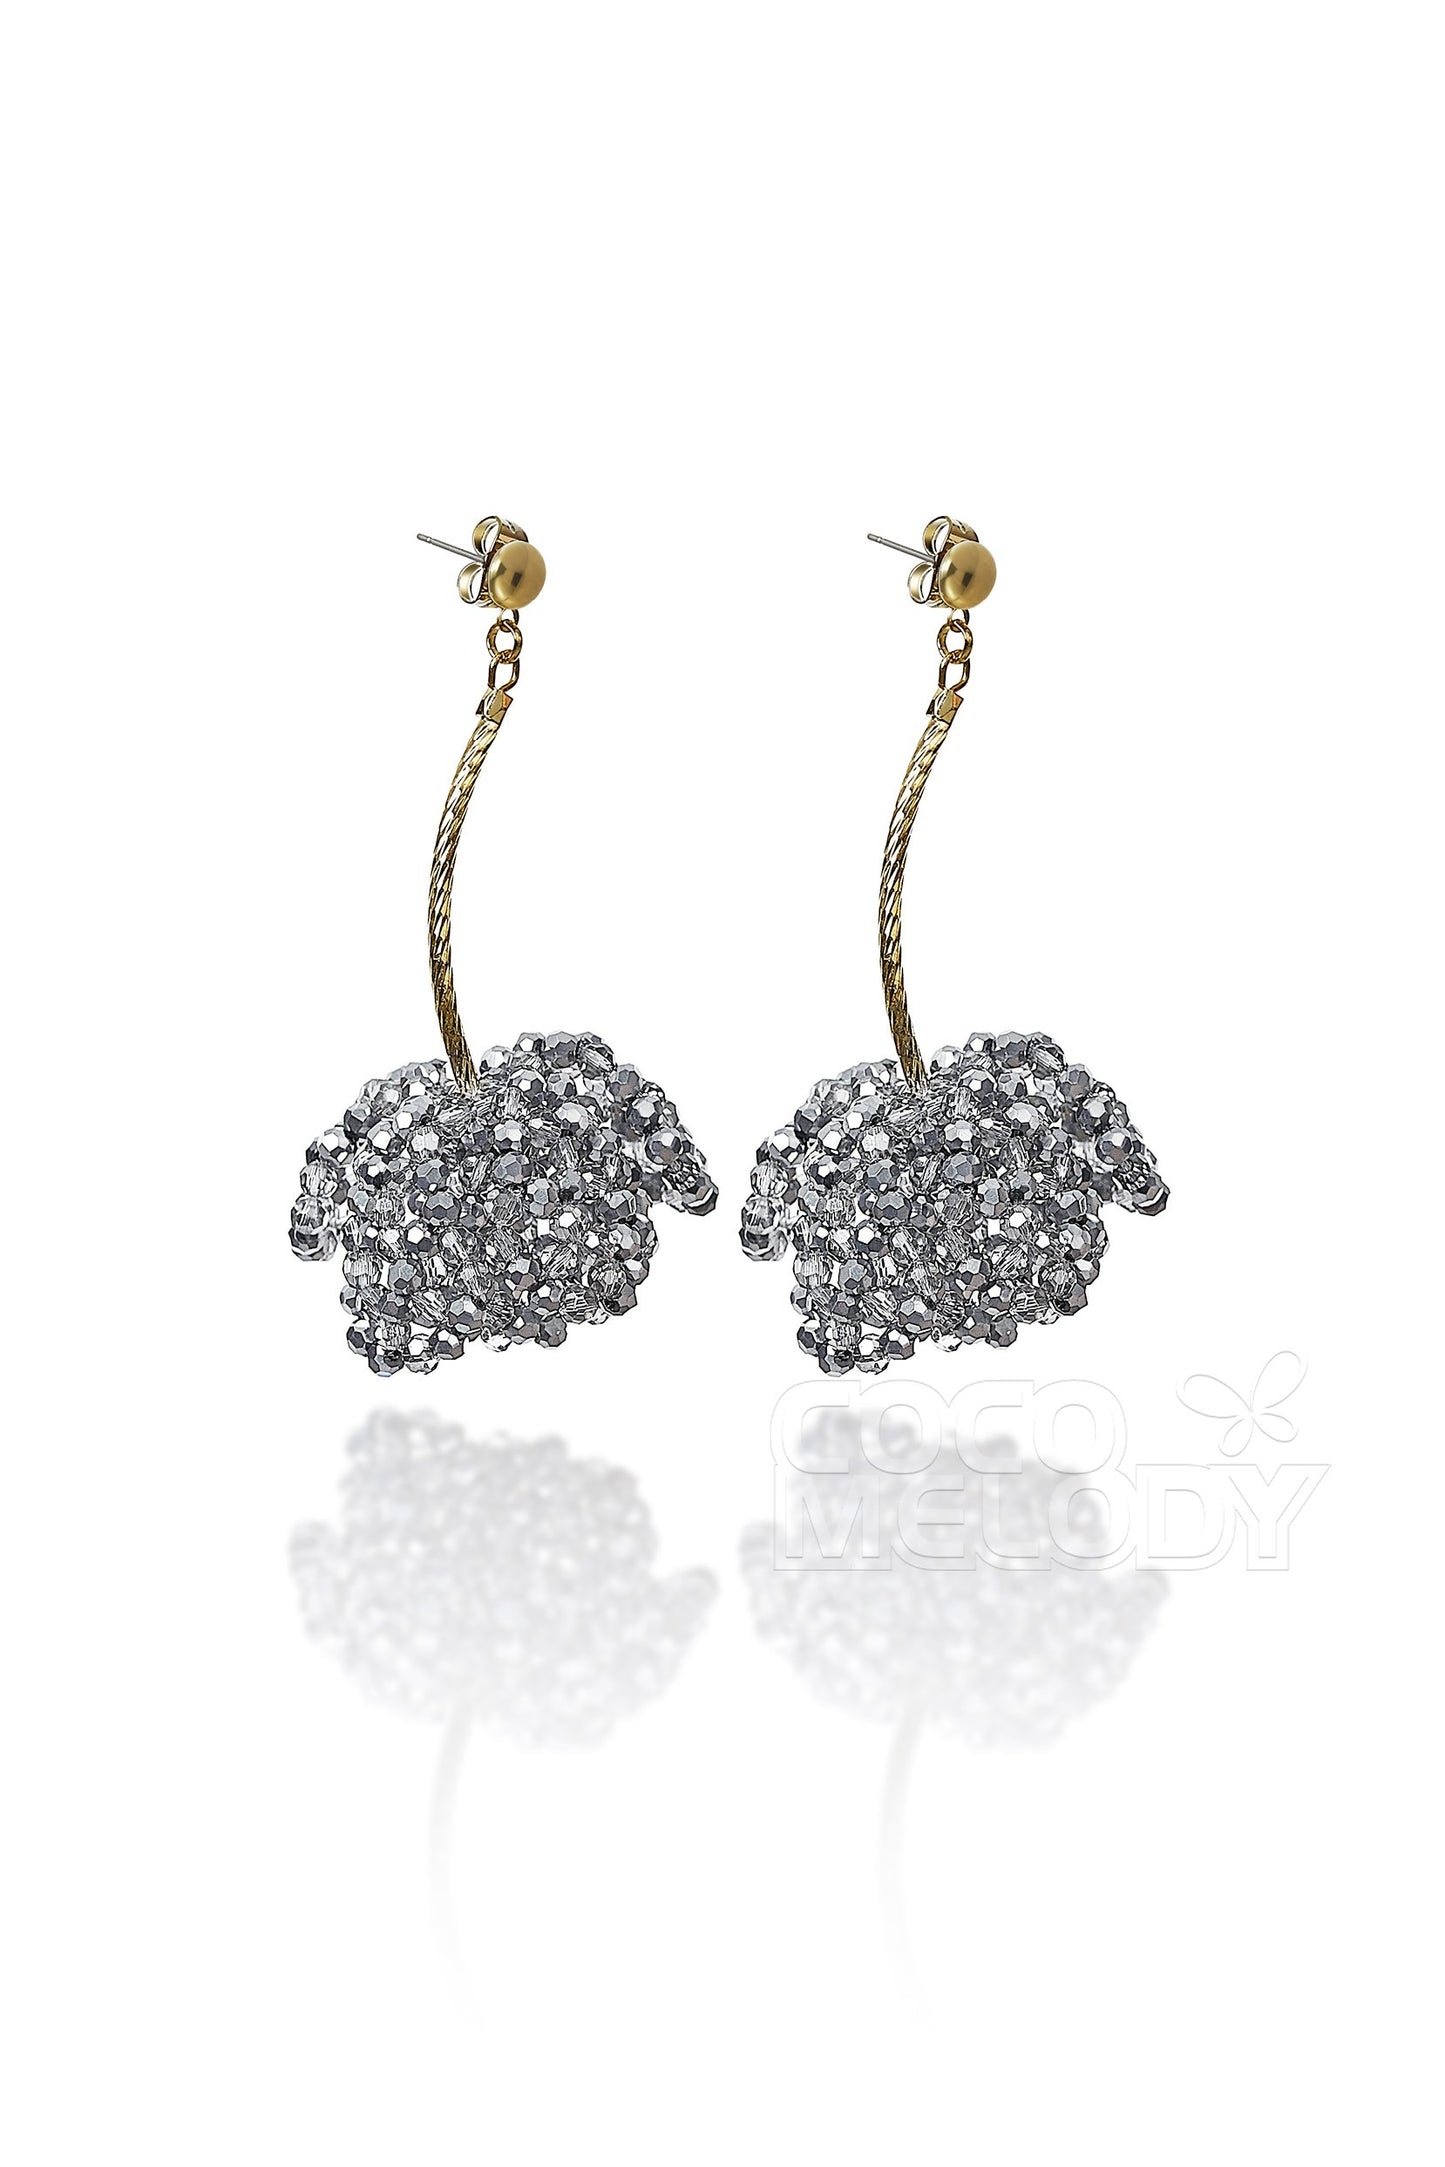 Fantastic Alloy Wedding Earrings with Crystals HG18006